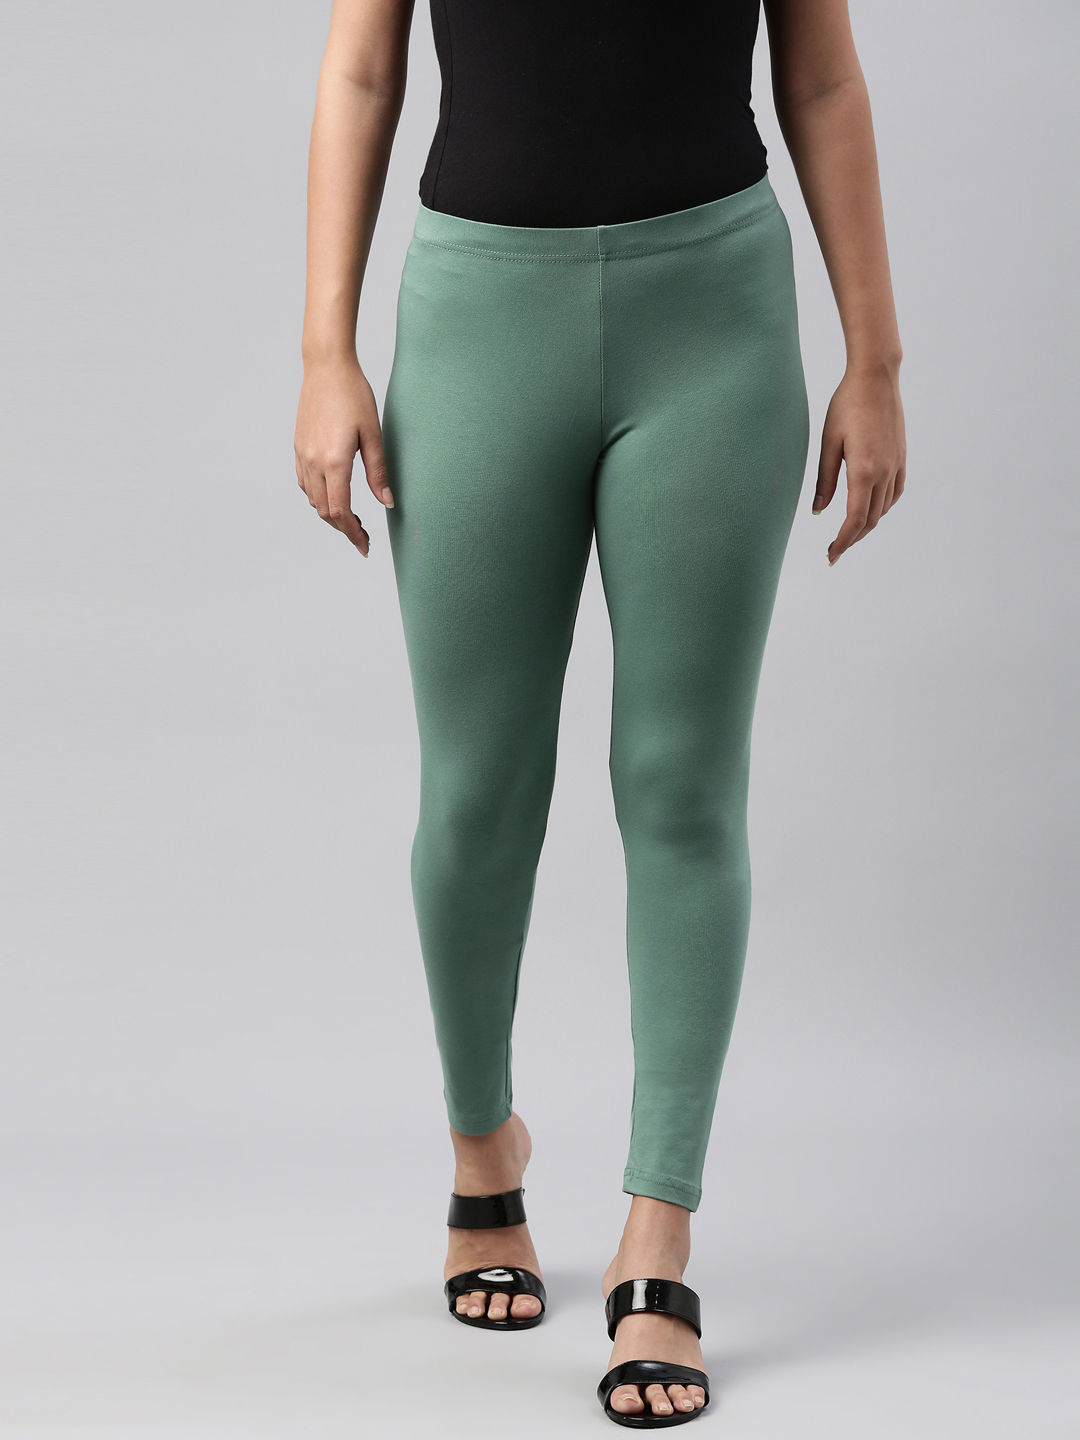 Dark Olive Green - solid color Leggings by Make it Colorful | Society6